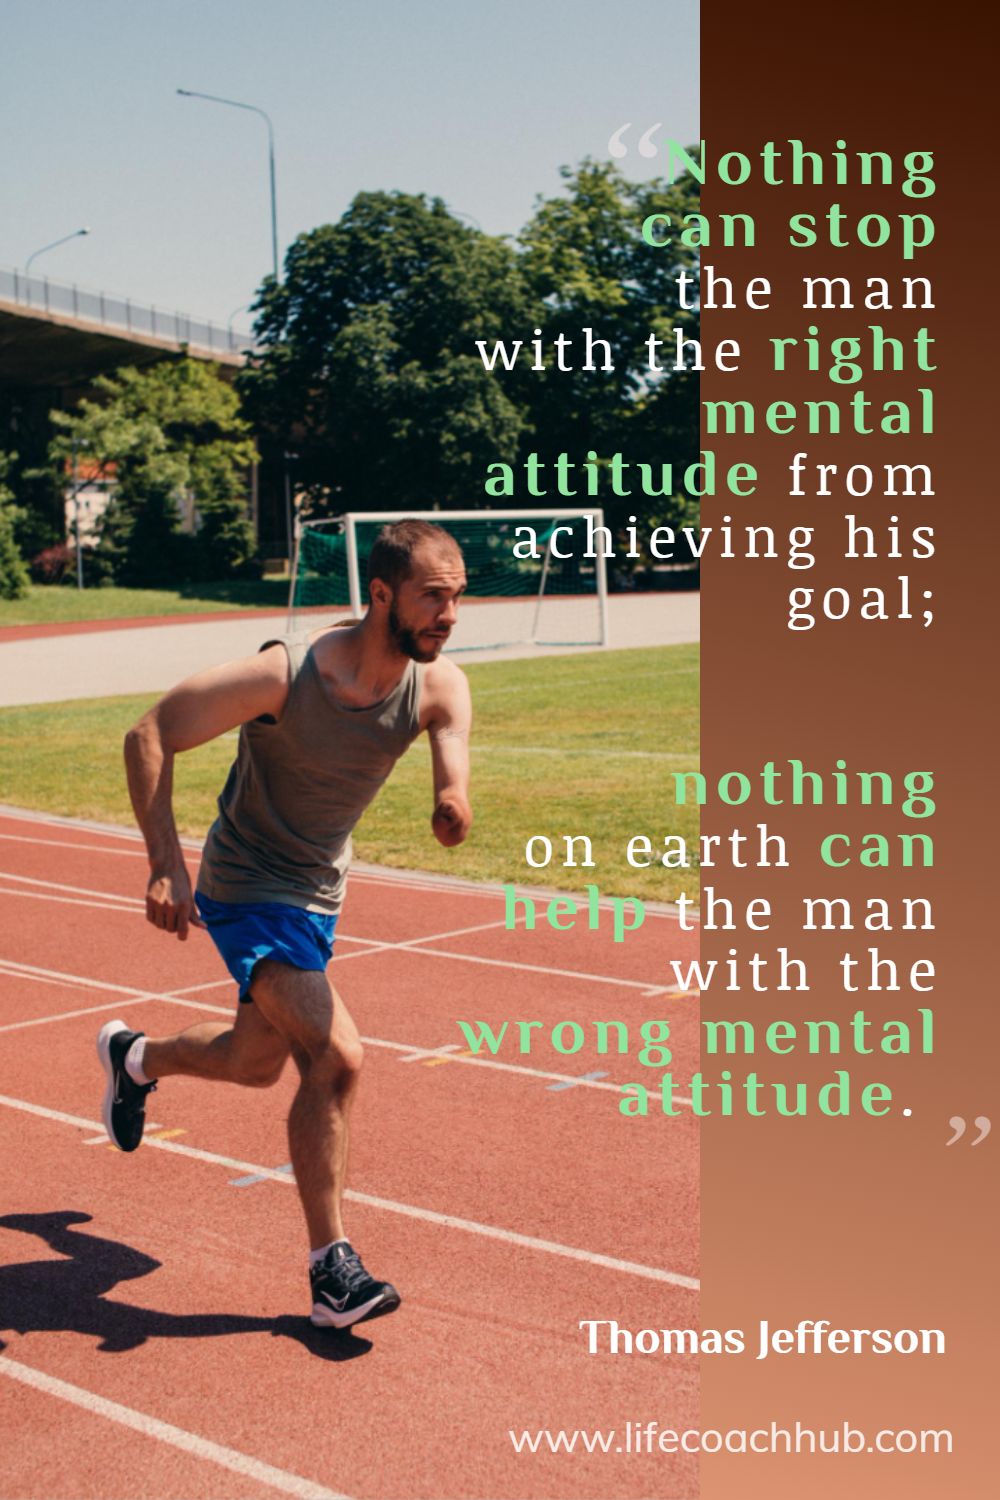 Nothing can stop the man with the right mental attitude from achieving his goal; nothing on earth can help the man with the wrong mental attitude. Thomas Jefferson Coaching Quote